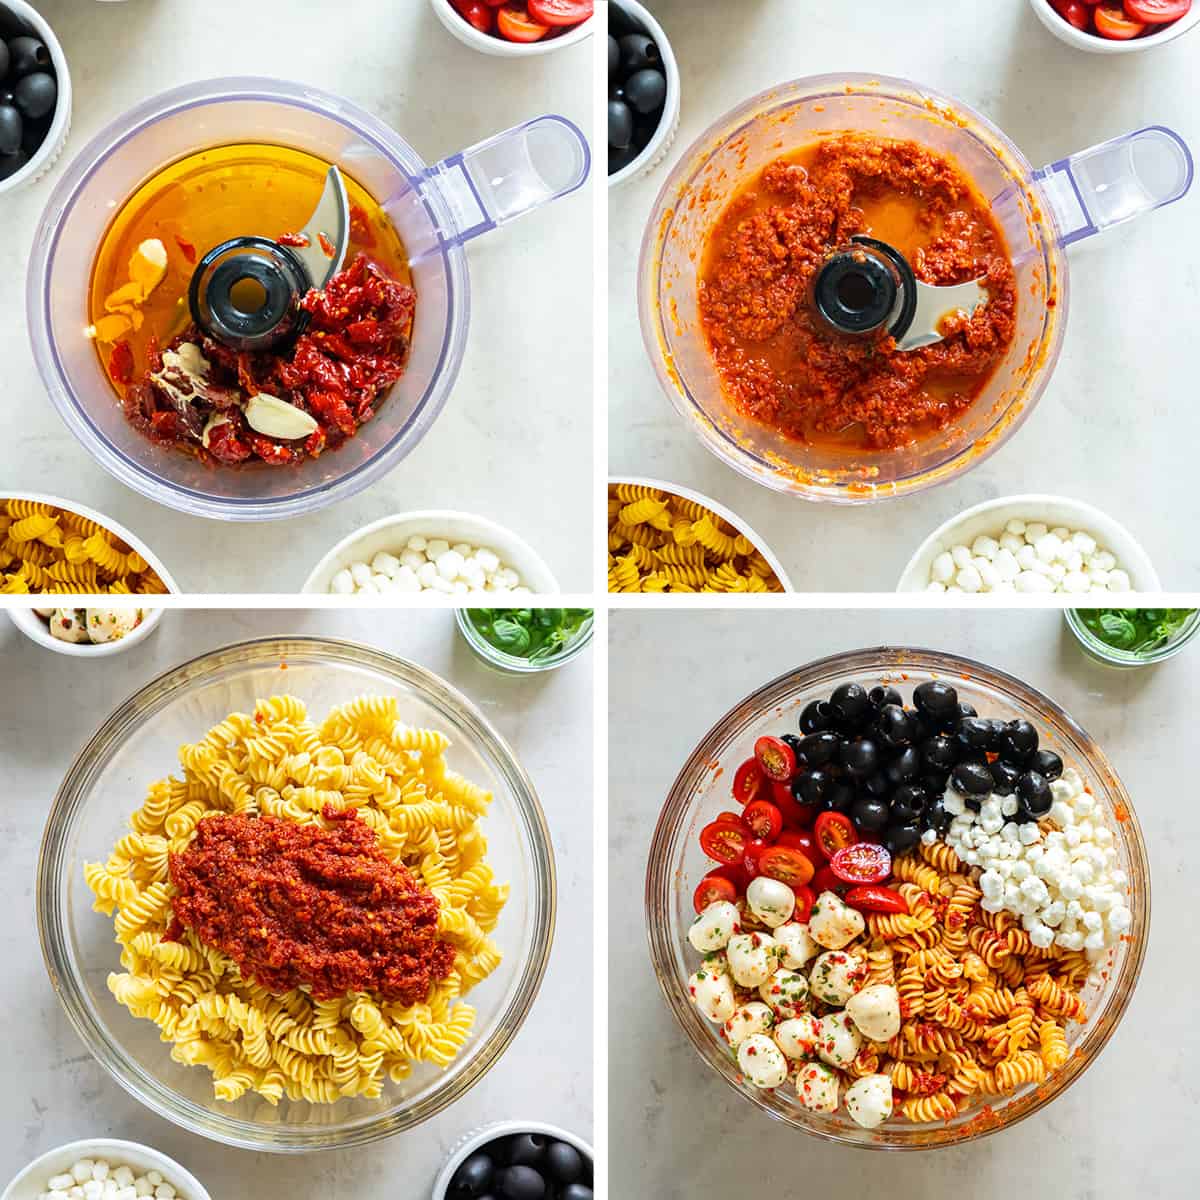 Four images of sun-dried tomato dressing being prepared in a food processor and then mixed with pasta and other ingredients in a mixing bowl.